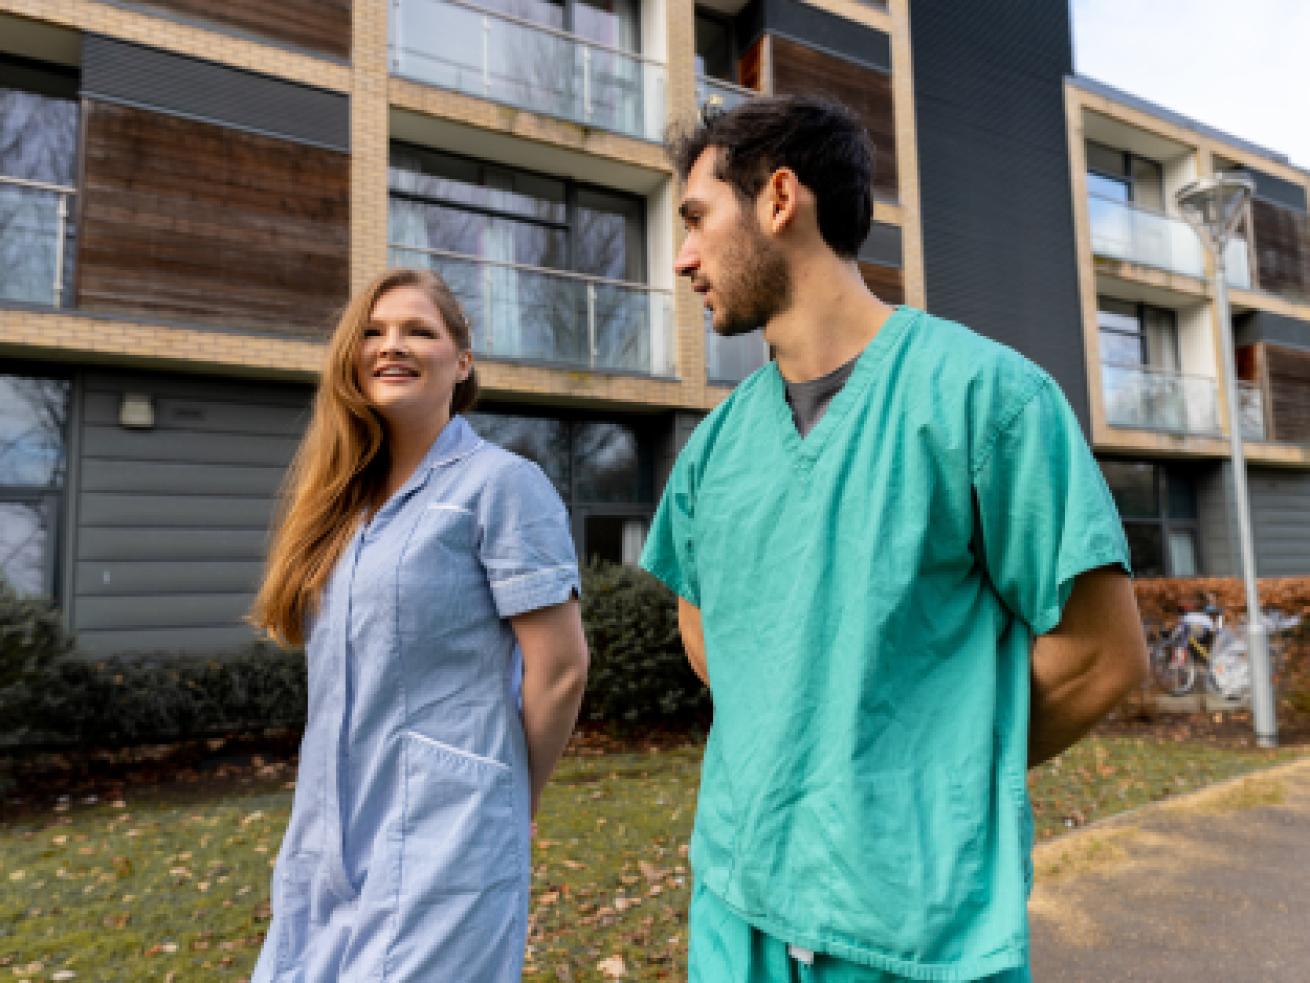 Keyworker students wearing hospital scrubs standing in front of a housing block